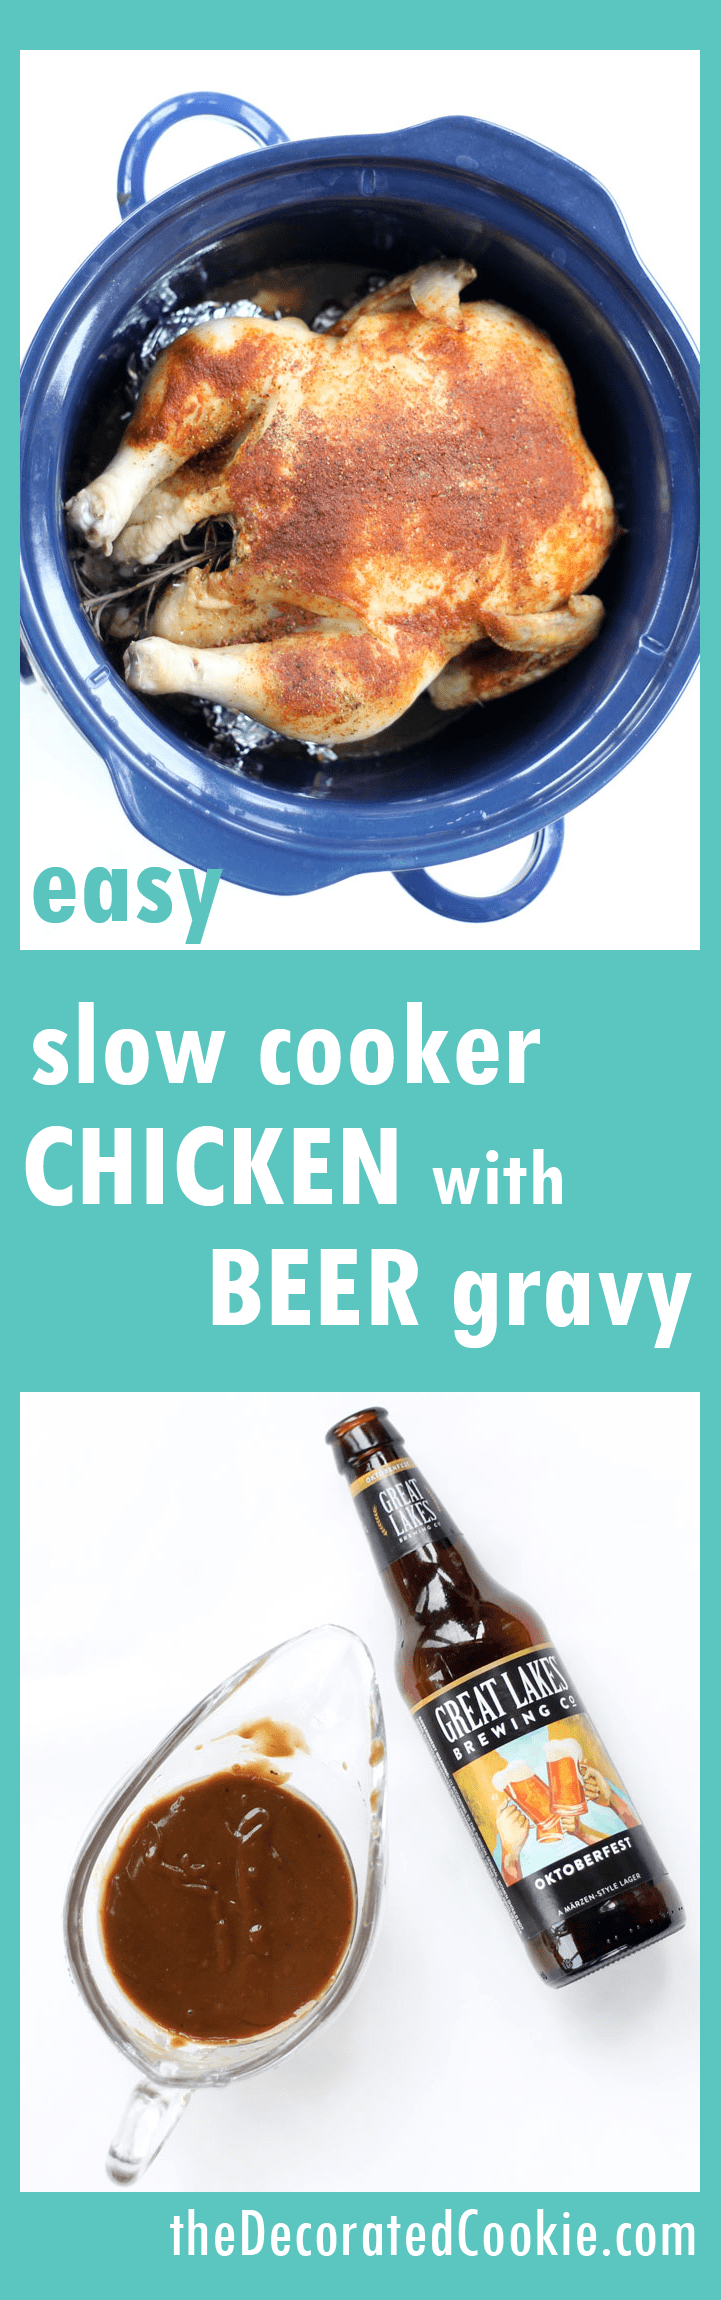 EASY DINNER IDEA: crock pot/slow cooker whole chicken with beer gravy